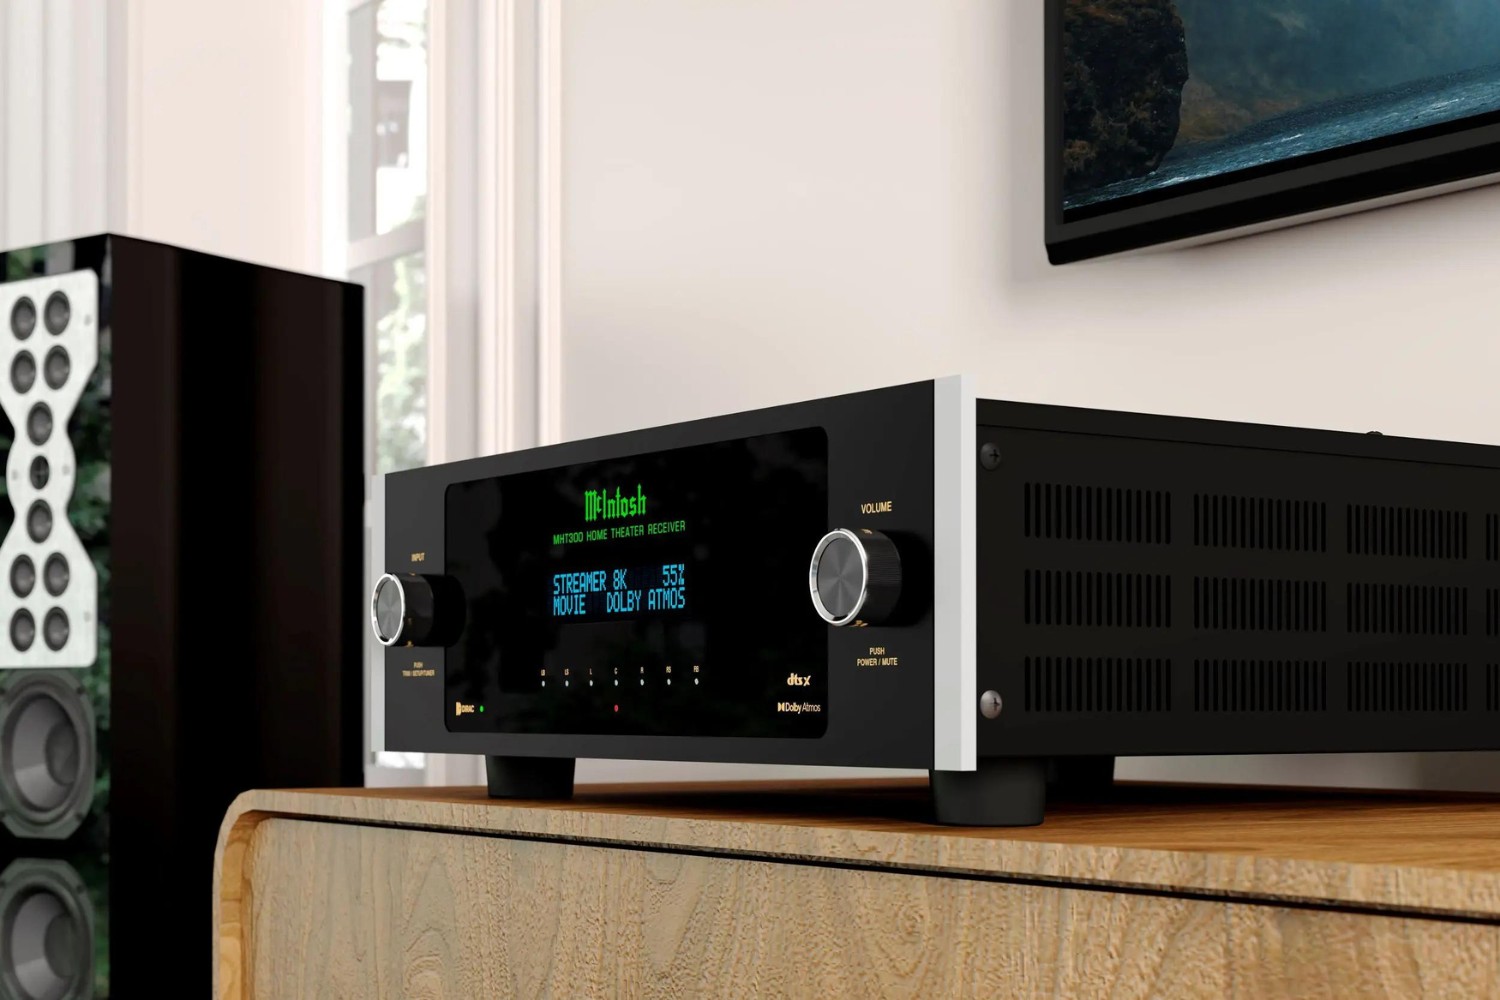 How To Connect Powered Speakers To An AV Receiver